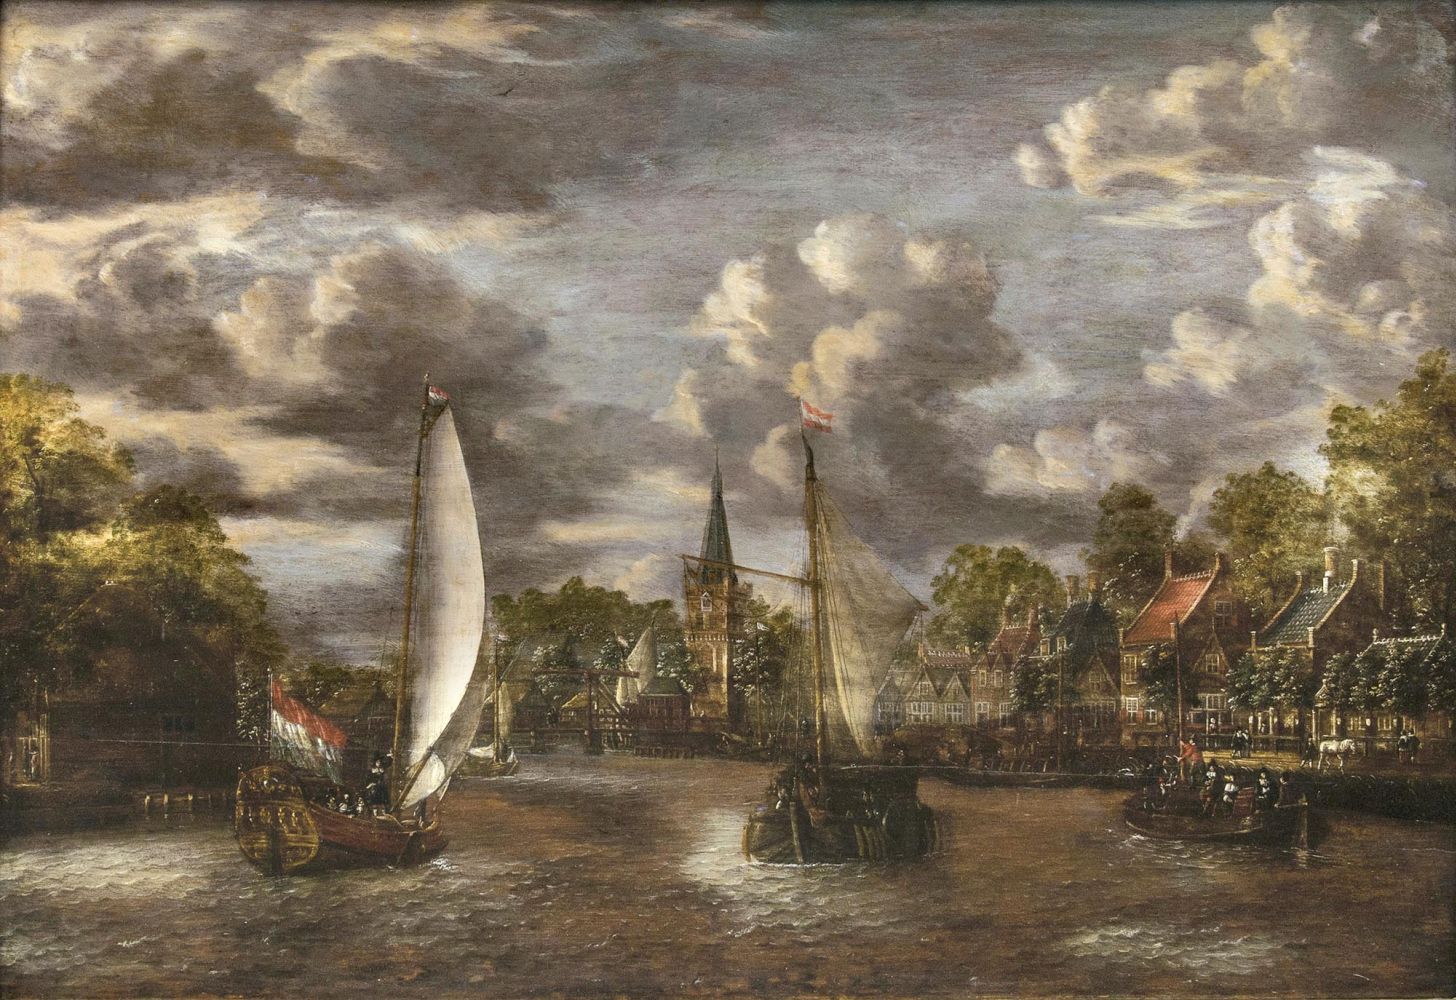 Boats on a River